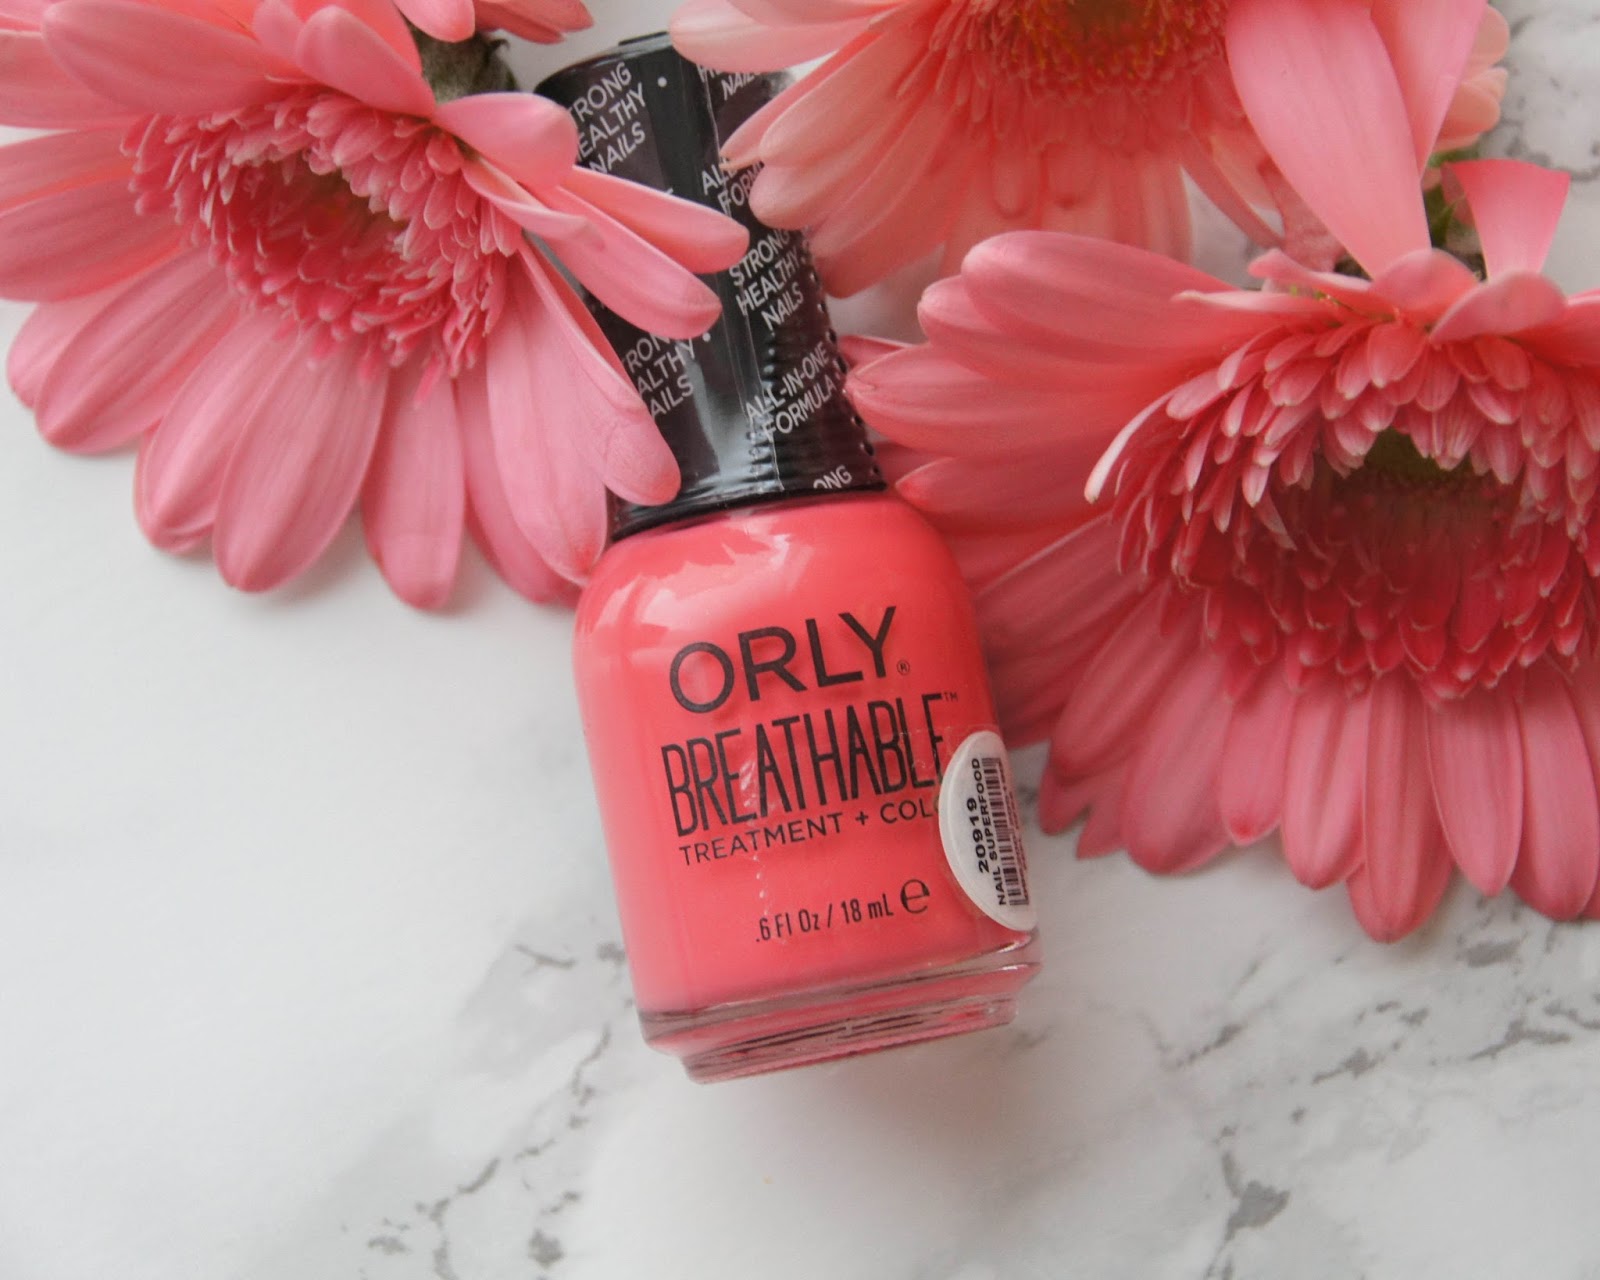 9. Orly Breathable Treatment + Color Nail Polish in "Power Packed" - wide 6